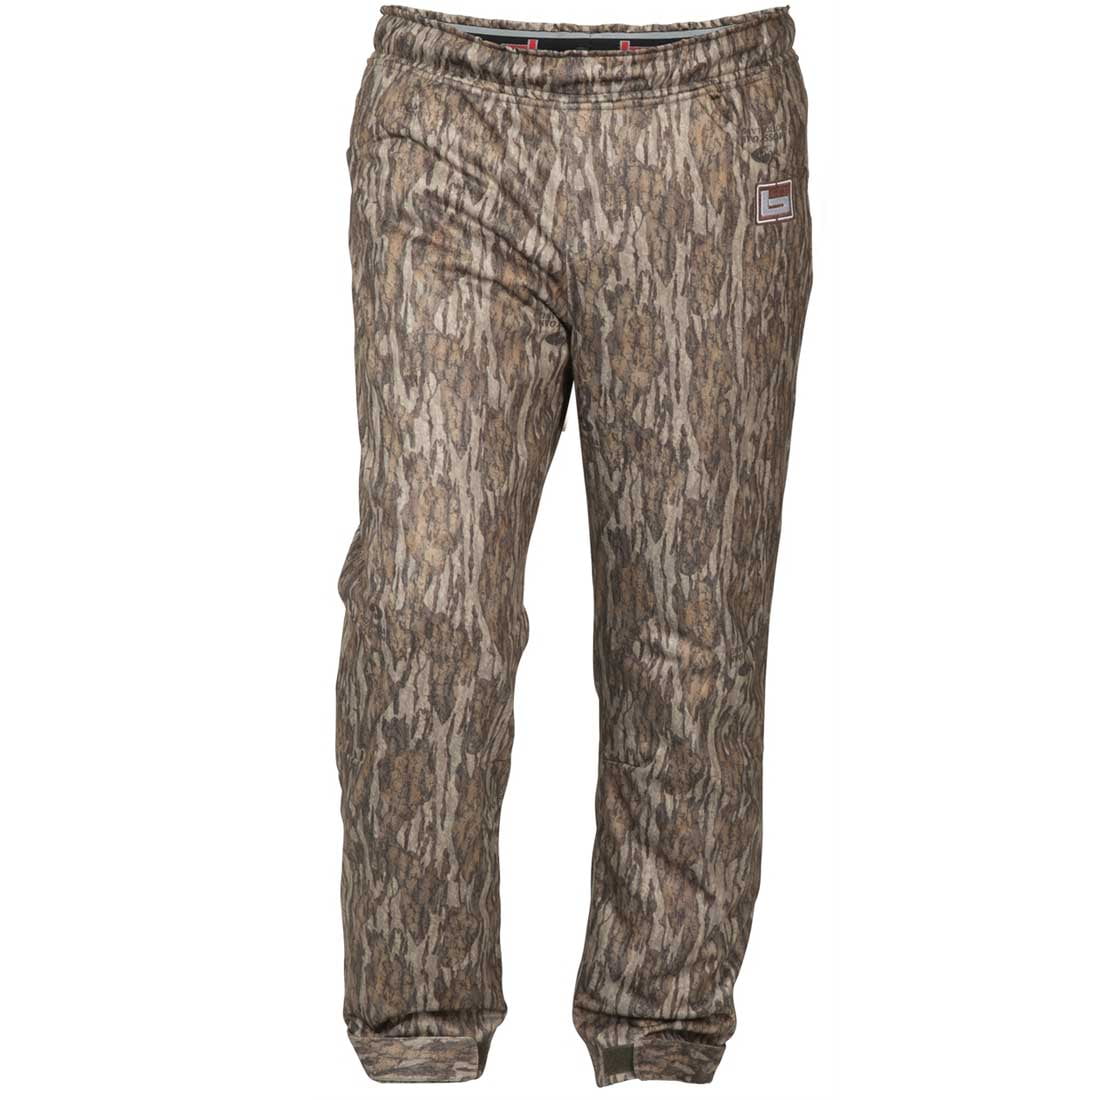 BANDED Adult Male Tec Fleece Wader Pants, Color: Bottomland, Size: Small